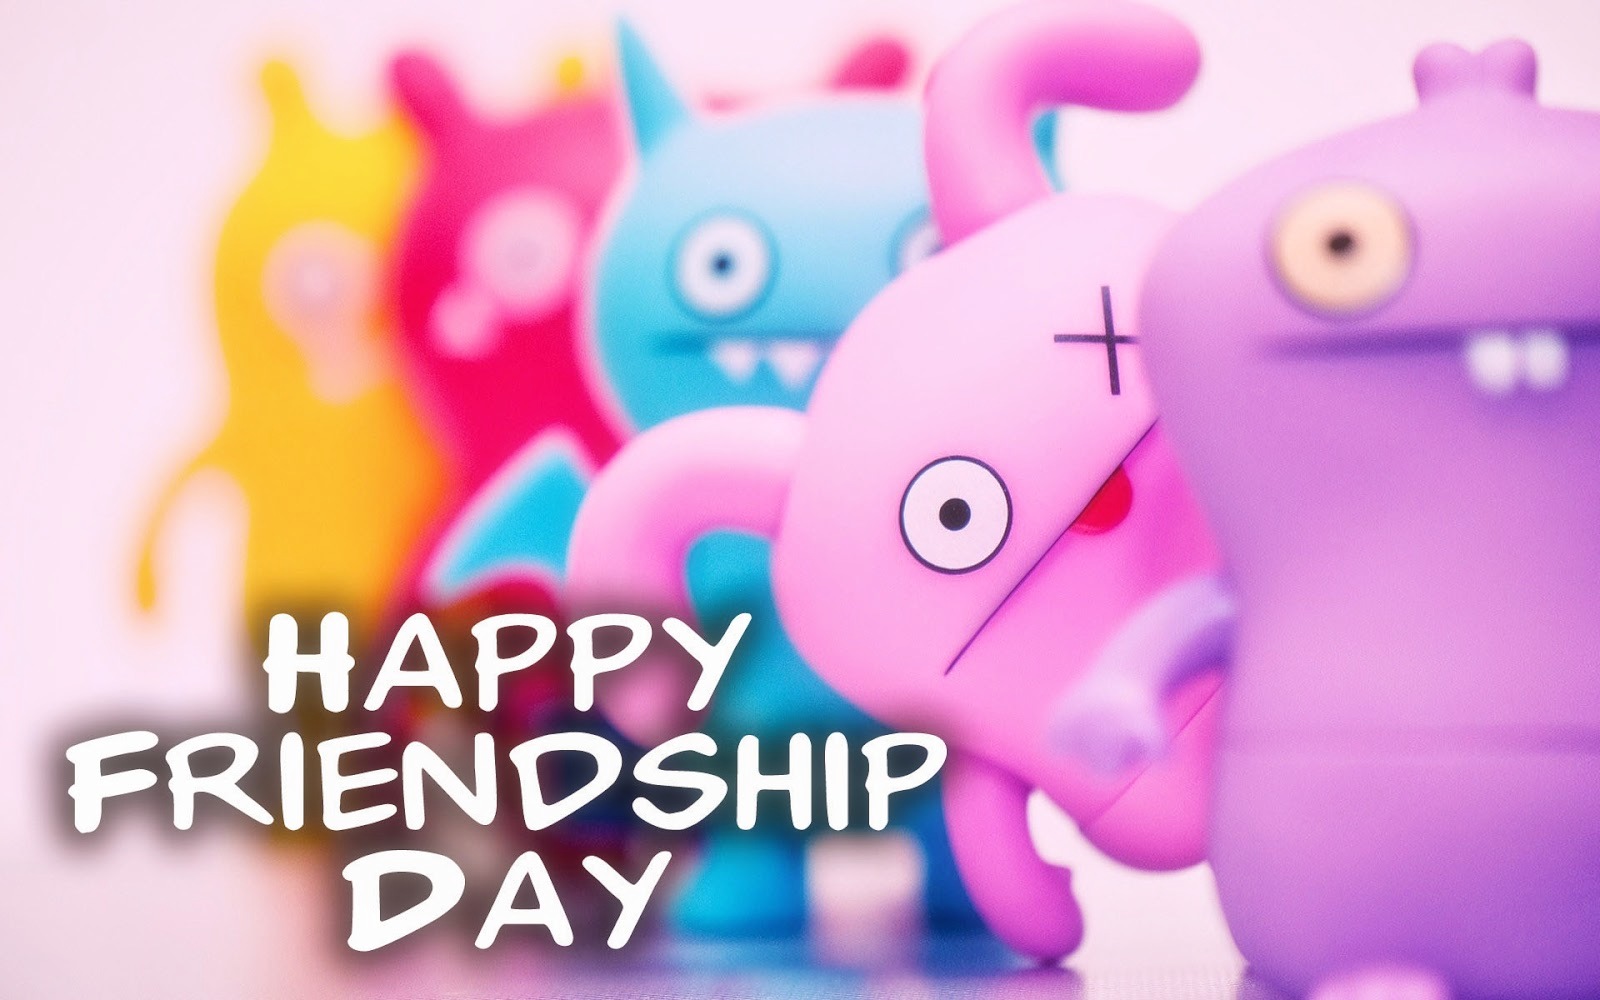 Friendship Day Whatsapp Dp Images - Happy Friendship Day , HD Wallpaper & Backgrounds